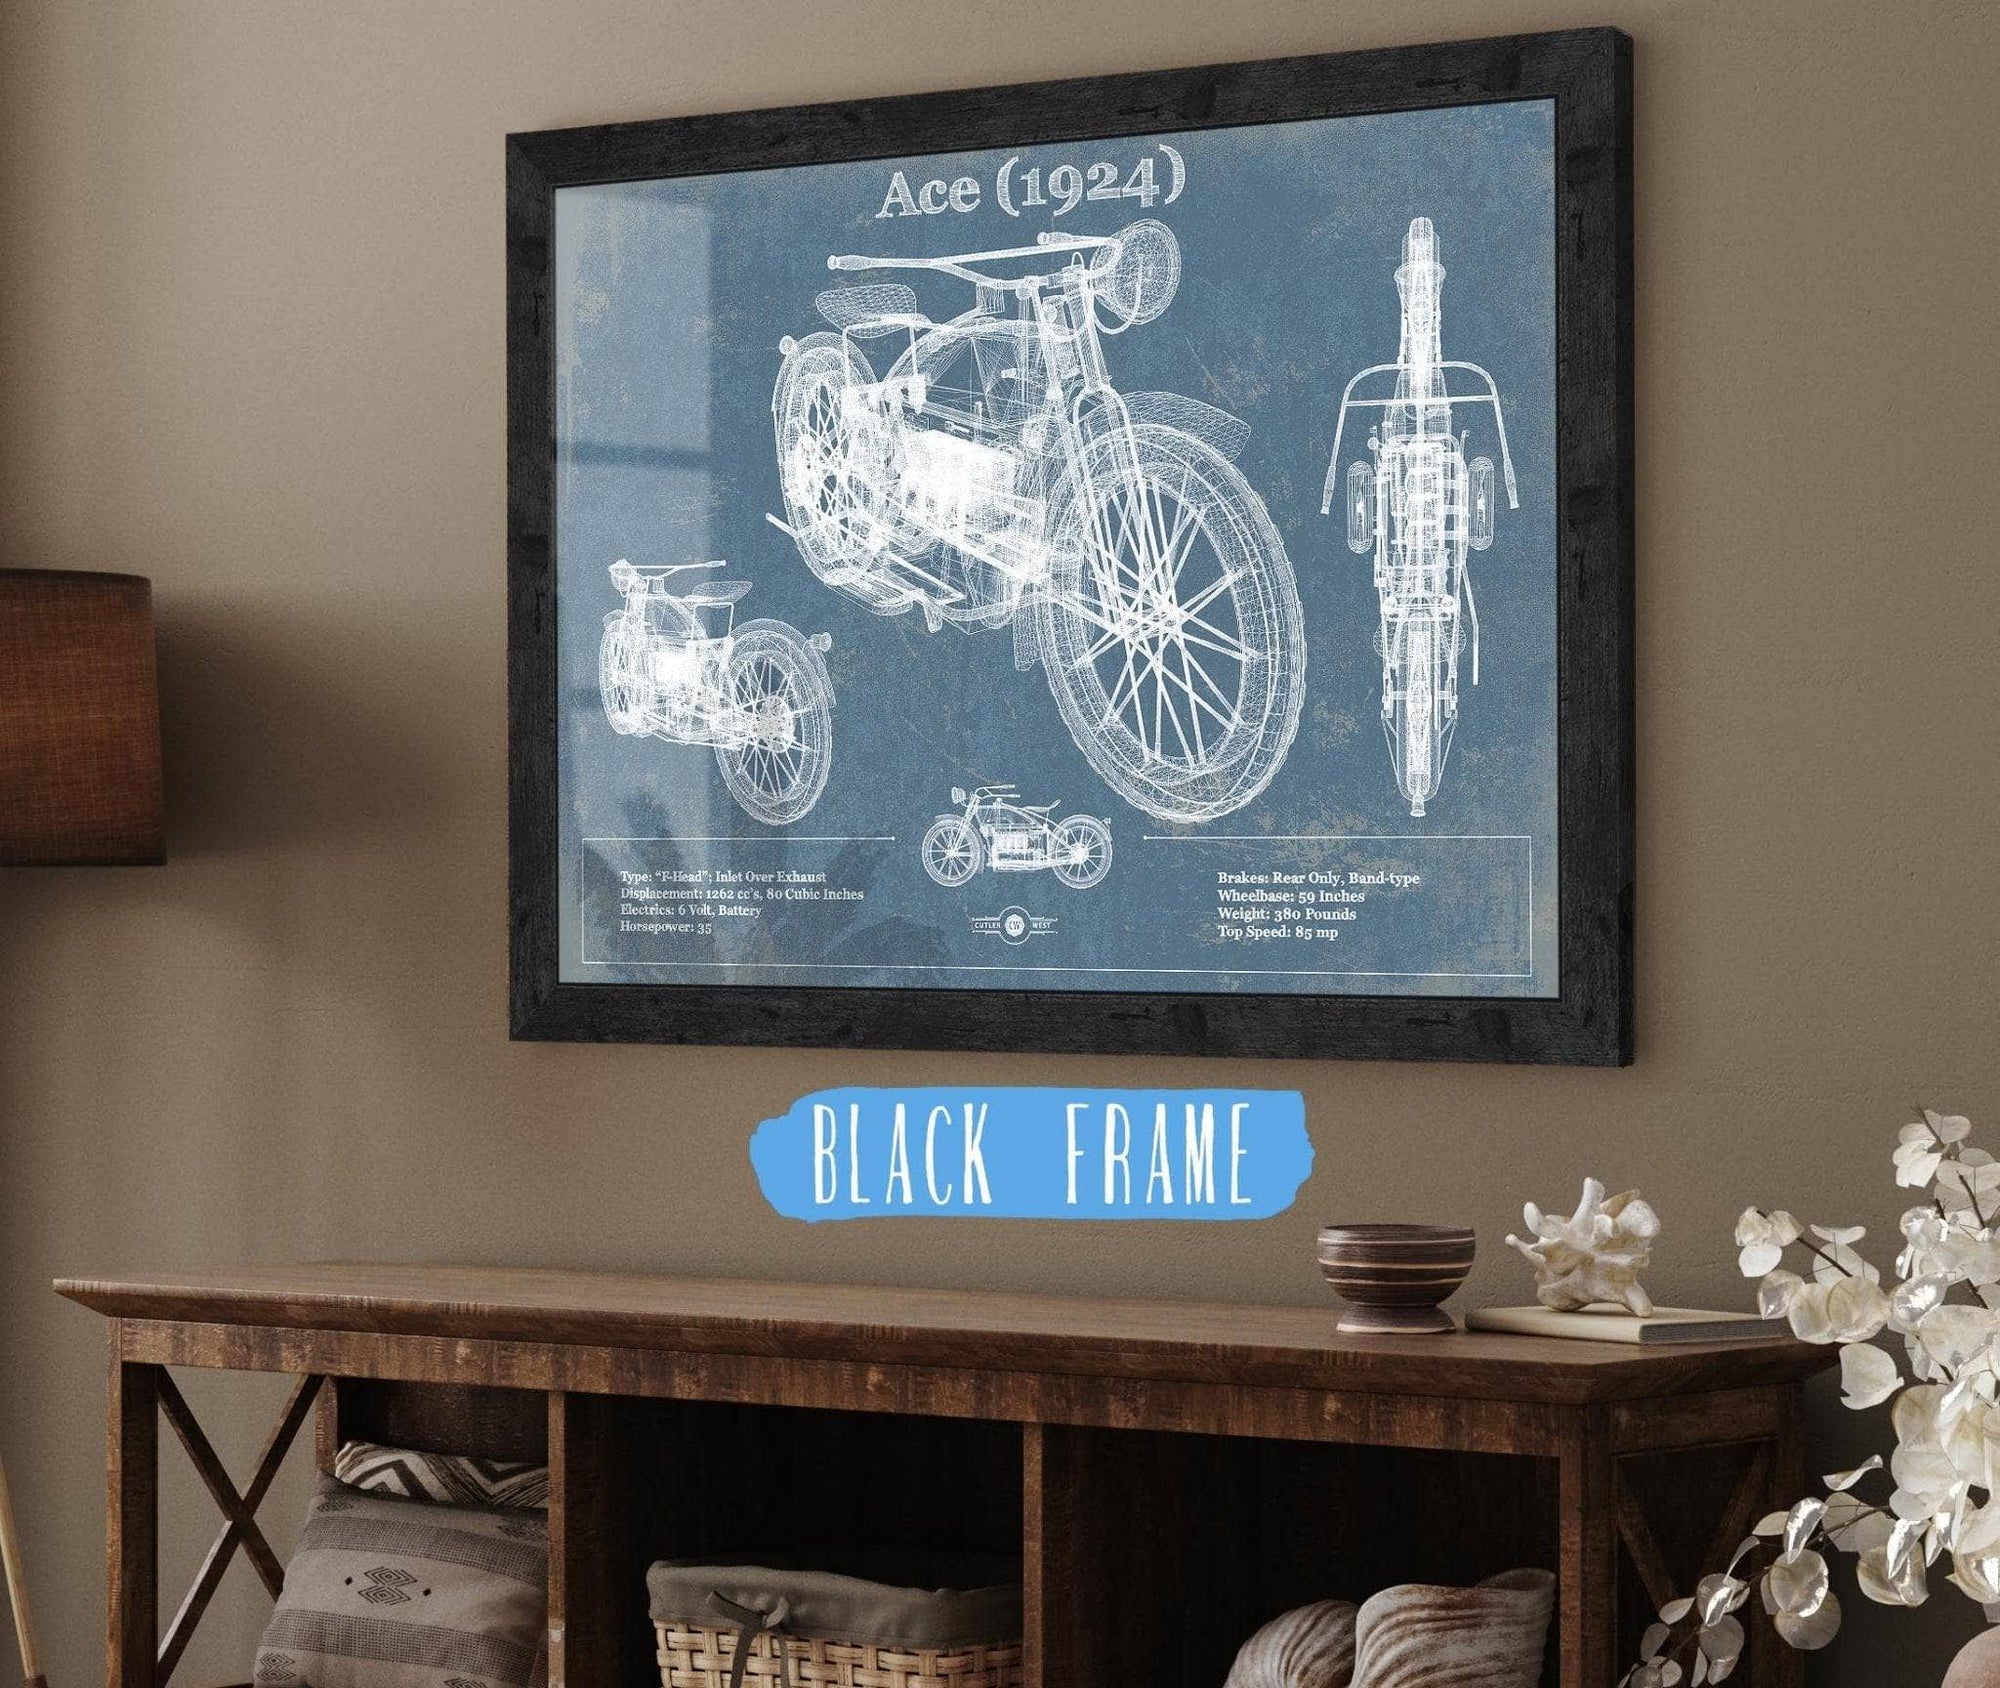 Cutler West Vehicle Collection 14" x 11" / Black Frame Ace (1924) Blueprint Motorcycle Patent Print 833110074_38904